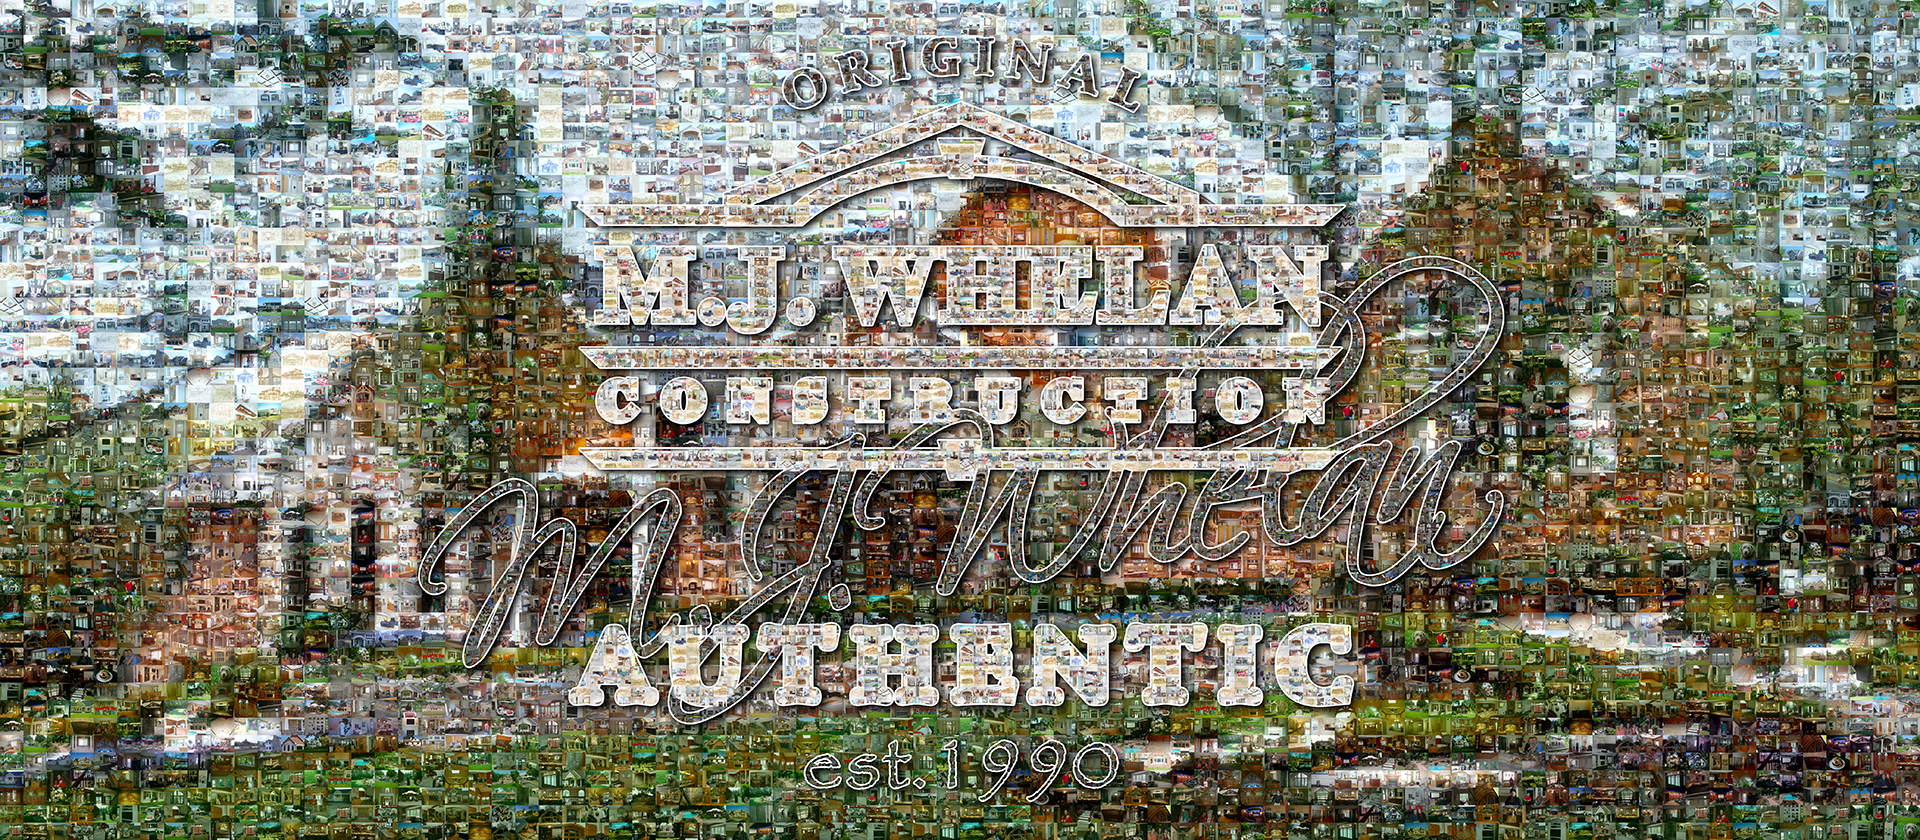 photo mosaic 1155 construction images make up this company mural for M. J. Whelan Construction